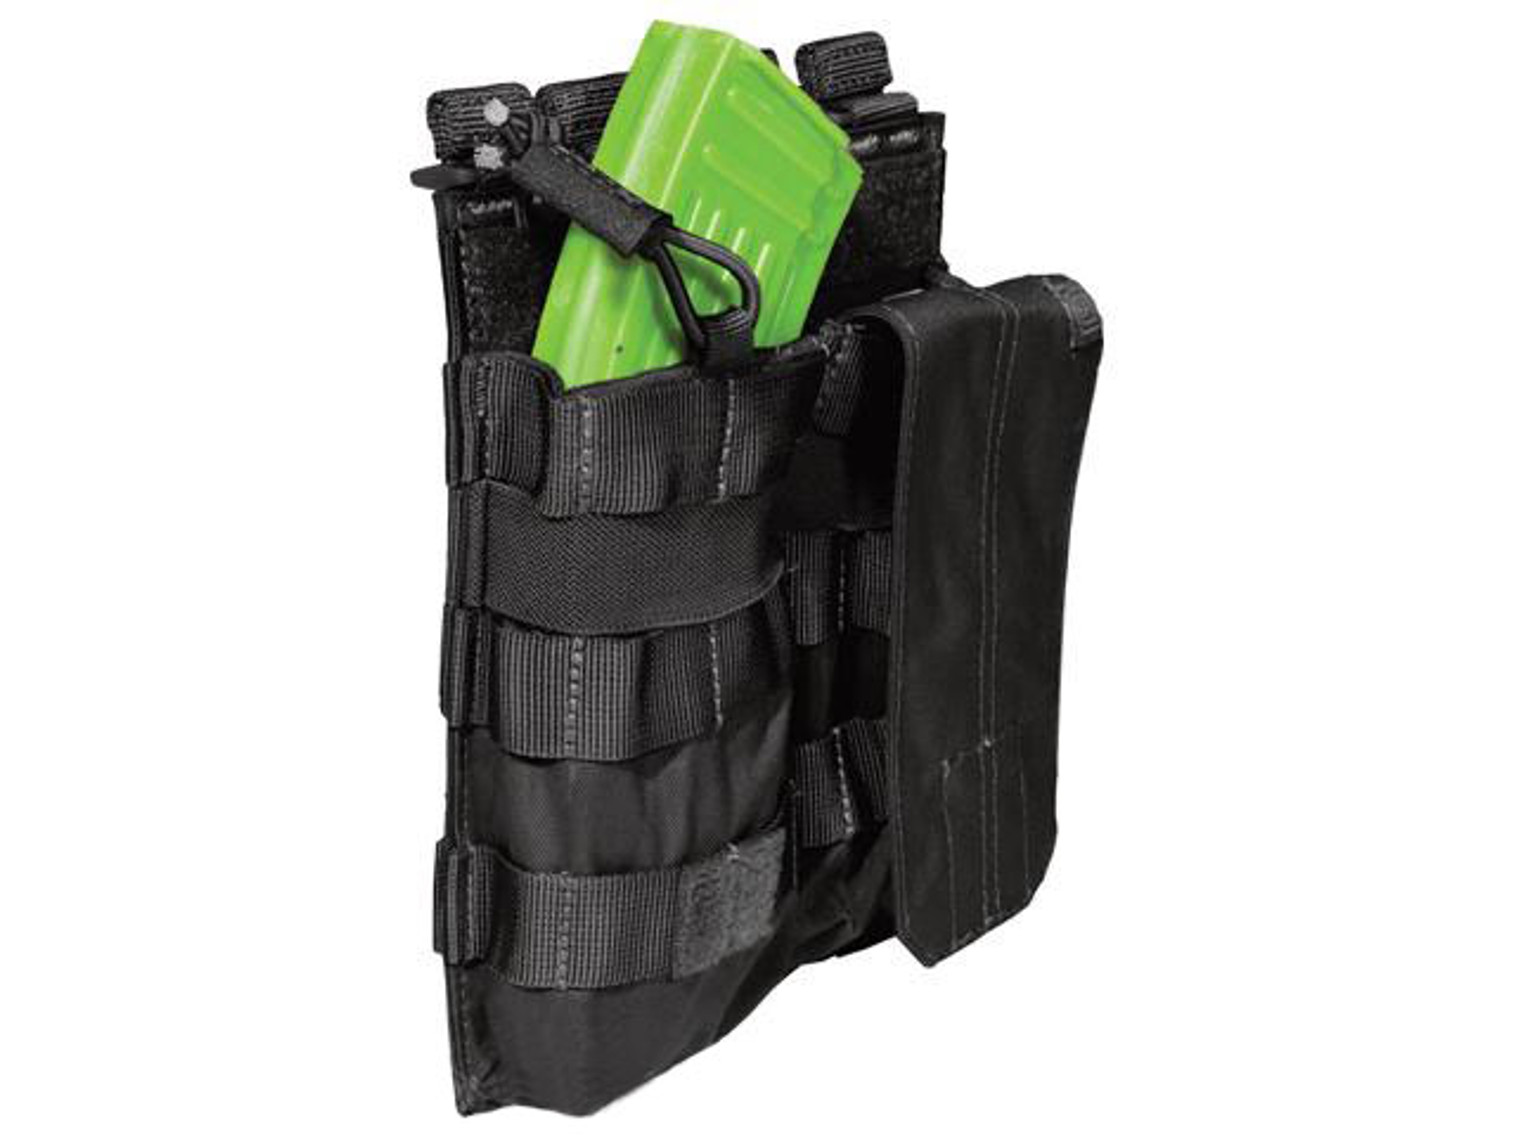 5.11 Tactical AK Double Bungee Cover Magazine Pouch - Black